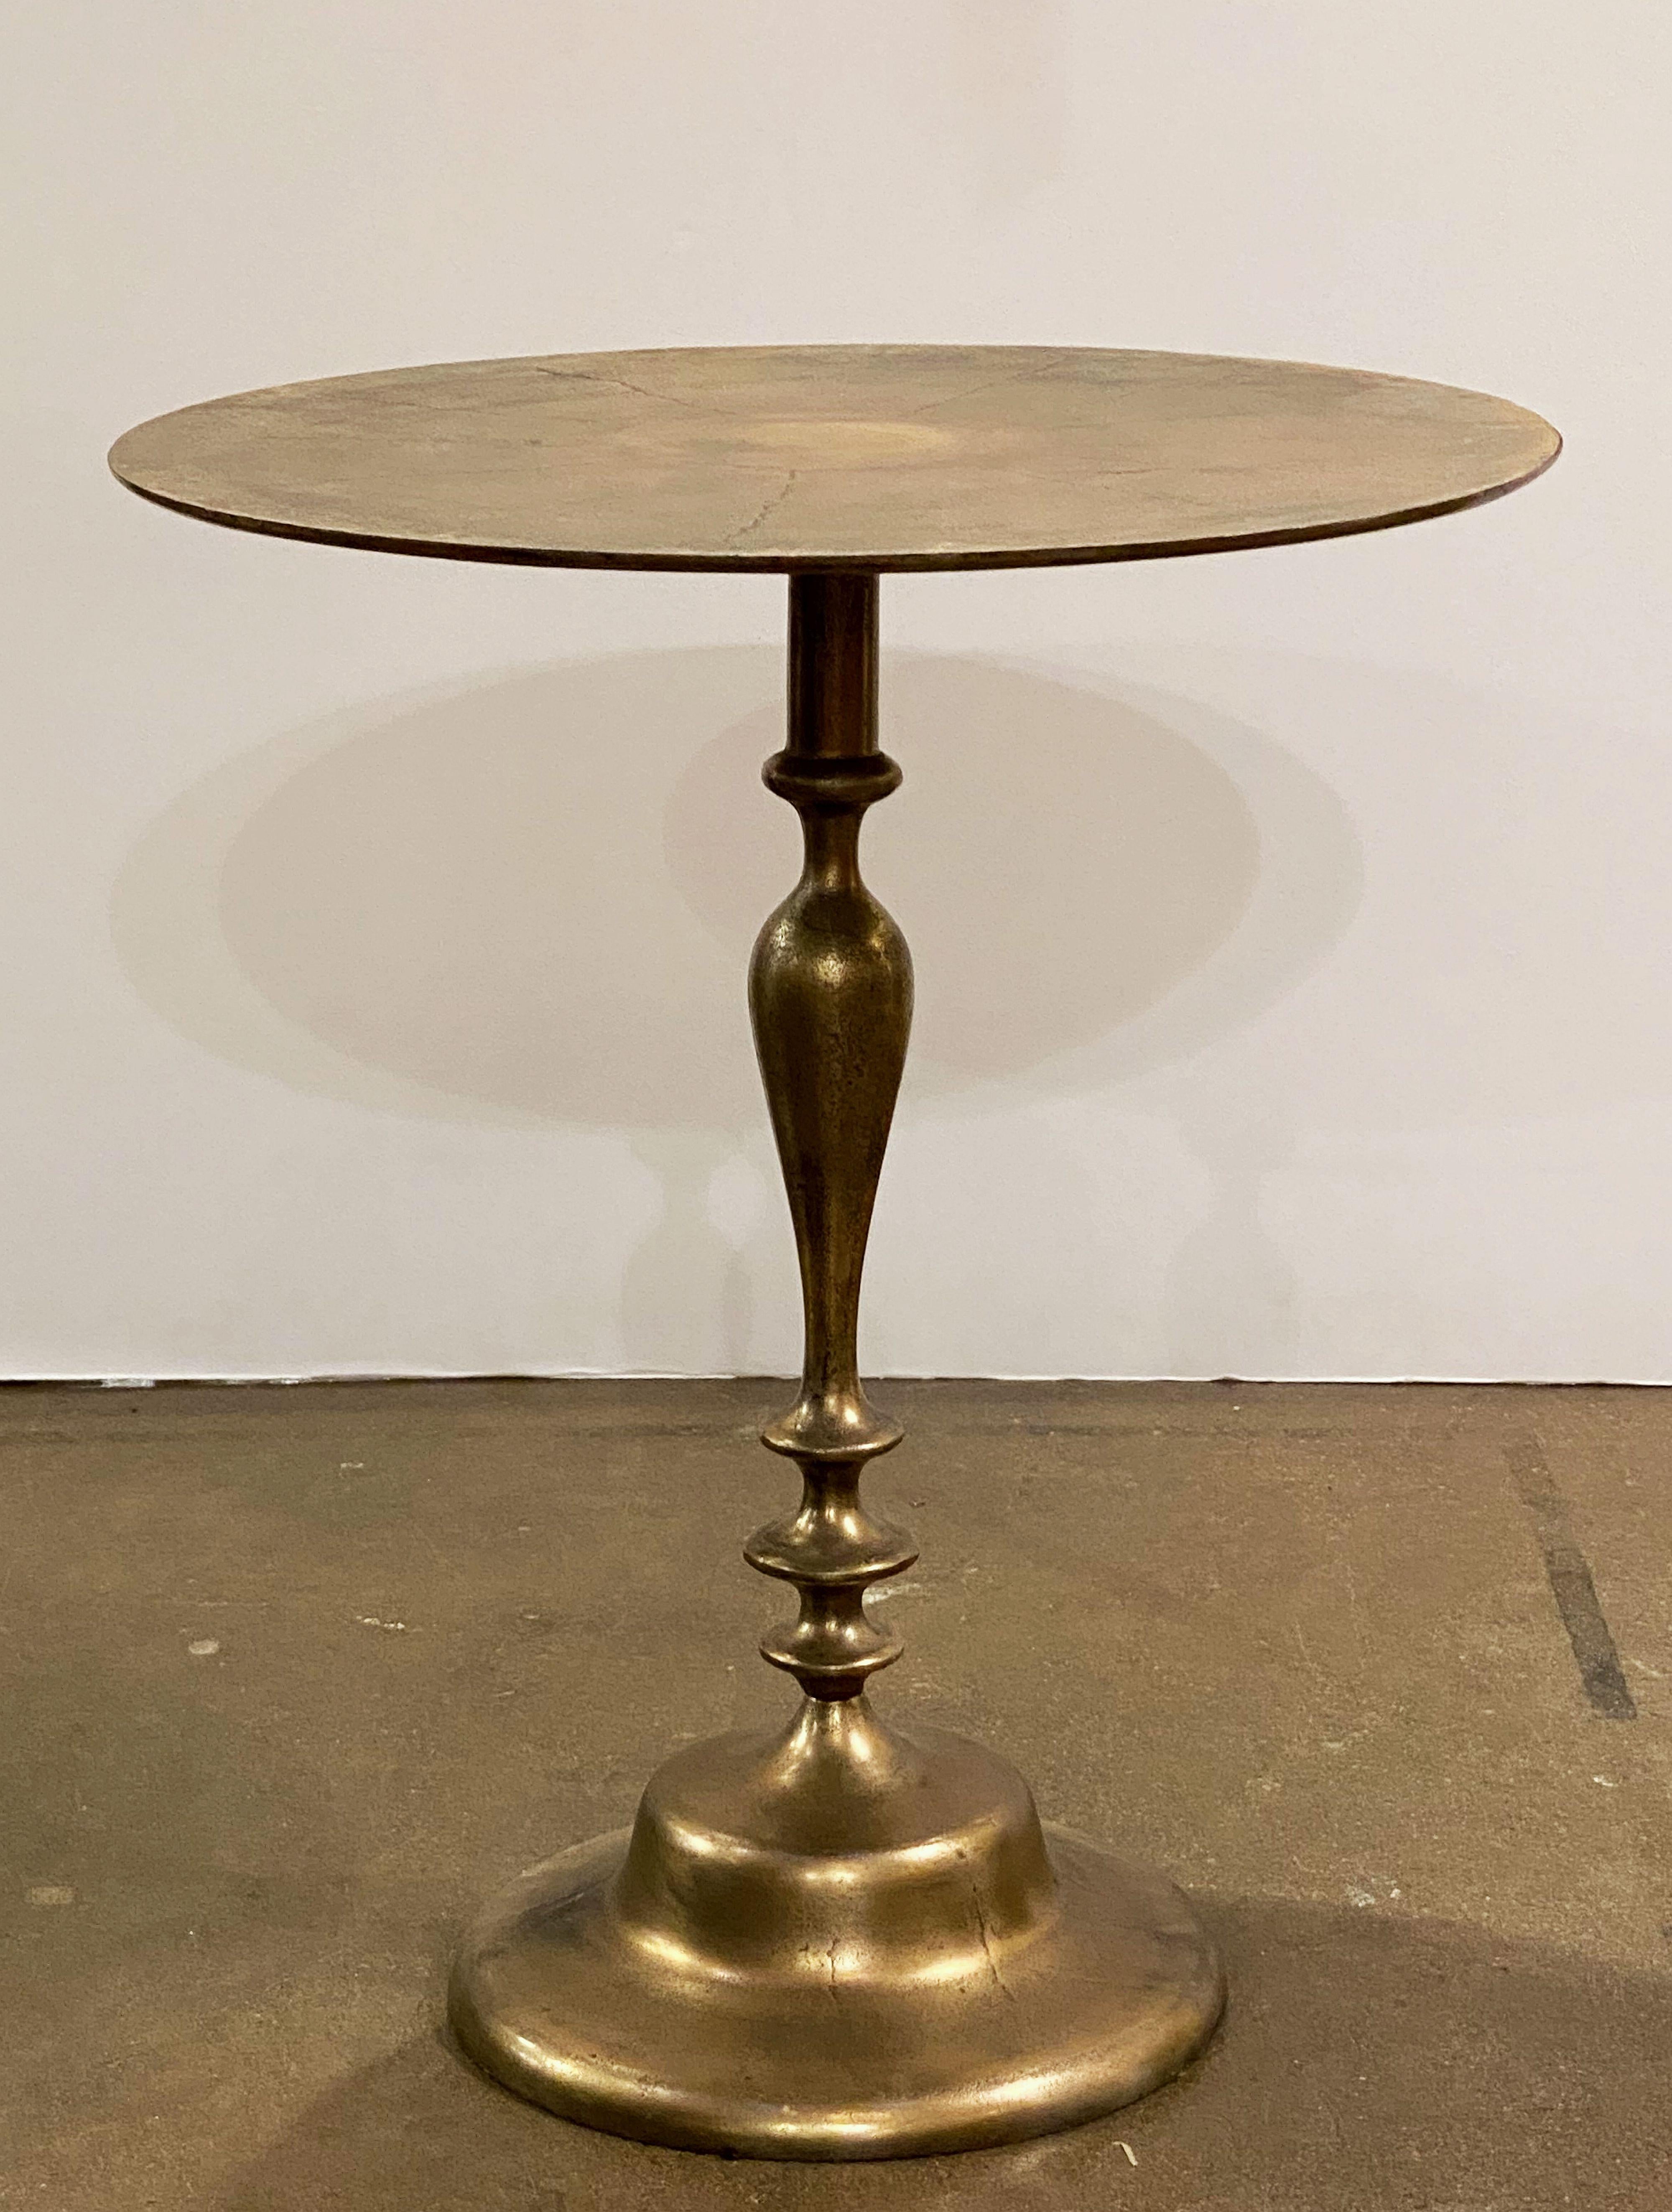 Cast French Round Bistro or Club Occasional Table from the Ritz Hotel, Paris